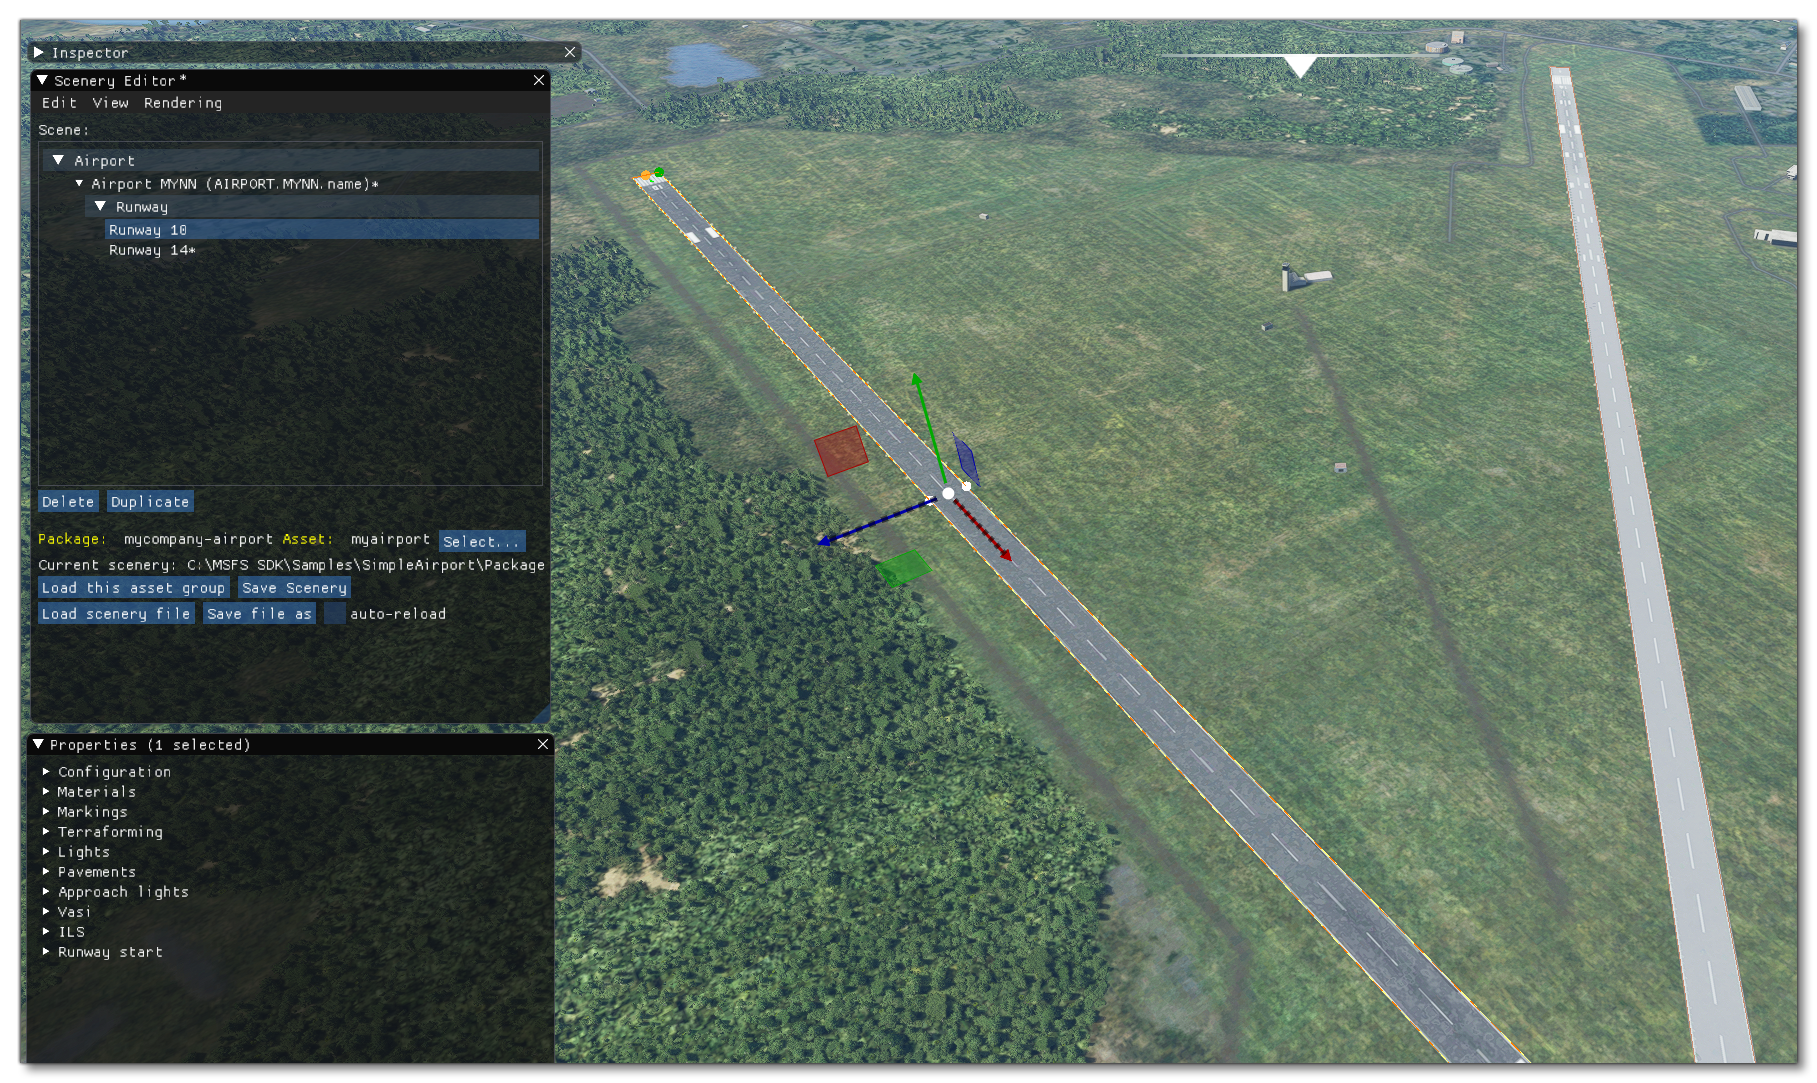 Simple Airport In The Scenery Editor